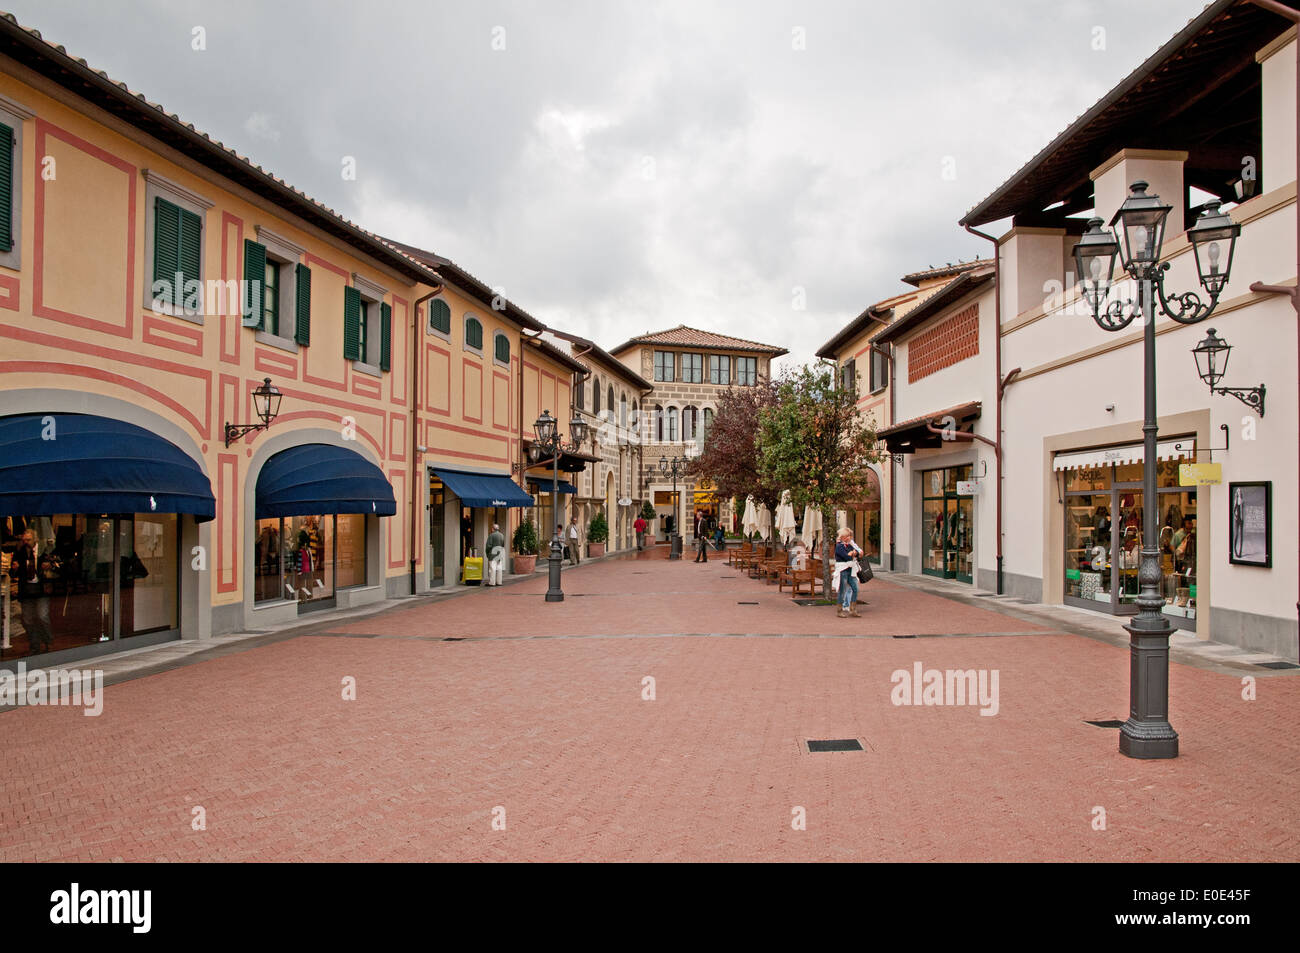 People shopping in McArthurGlen Barberino Designer Outlet arcade Stock Photo, Royalty Free Image ...